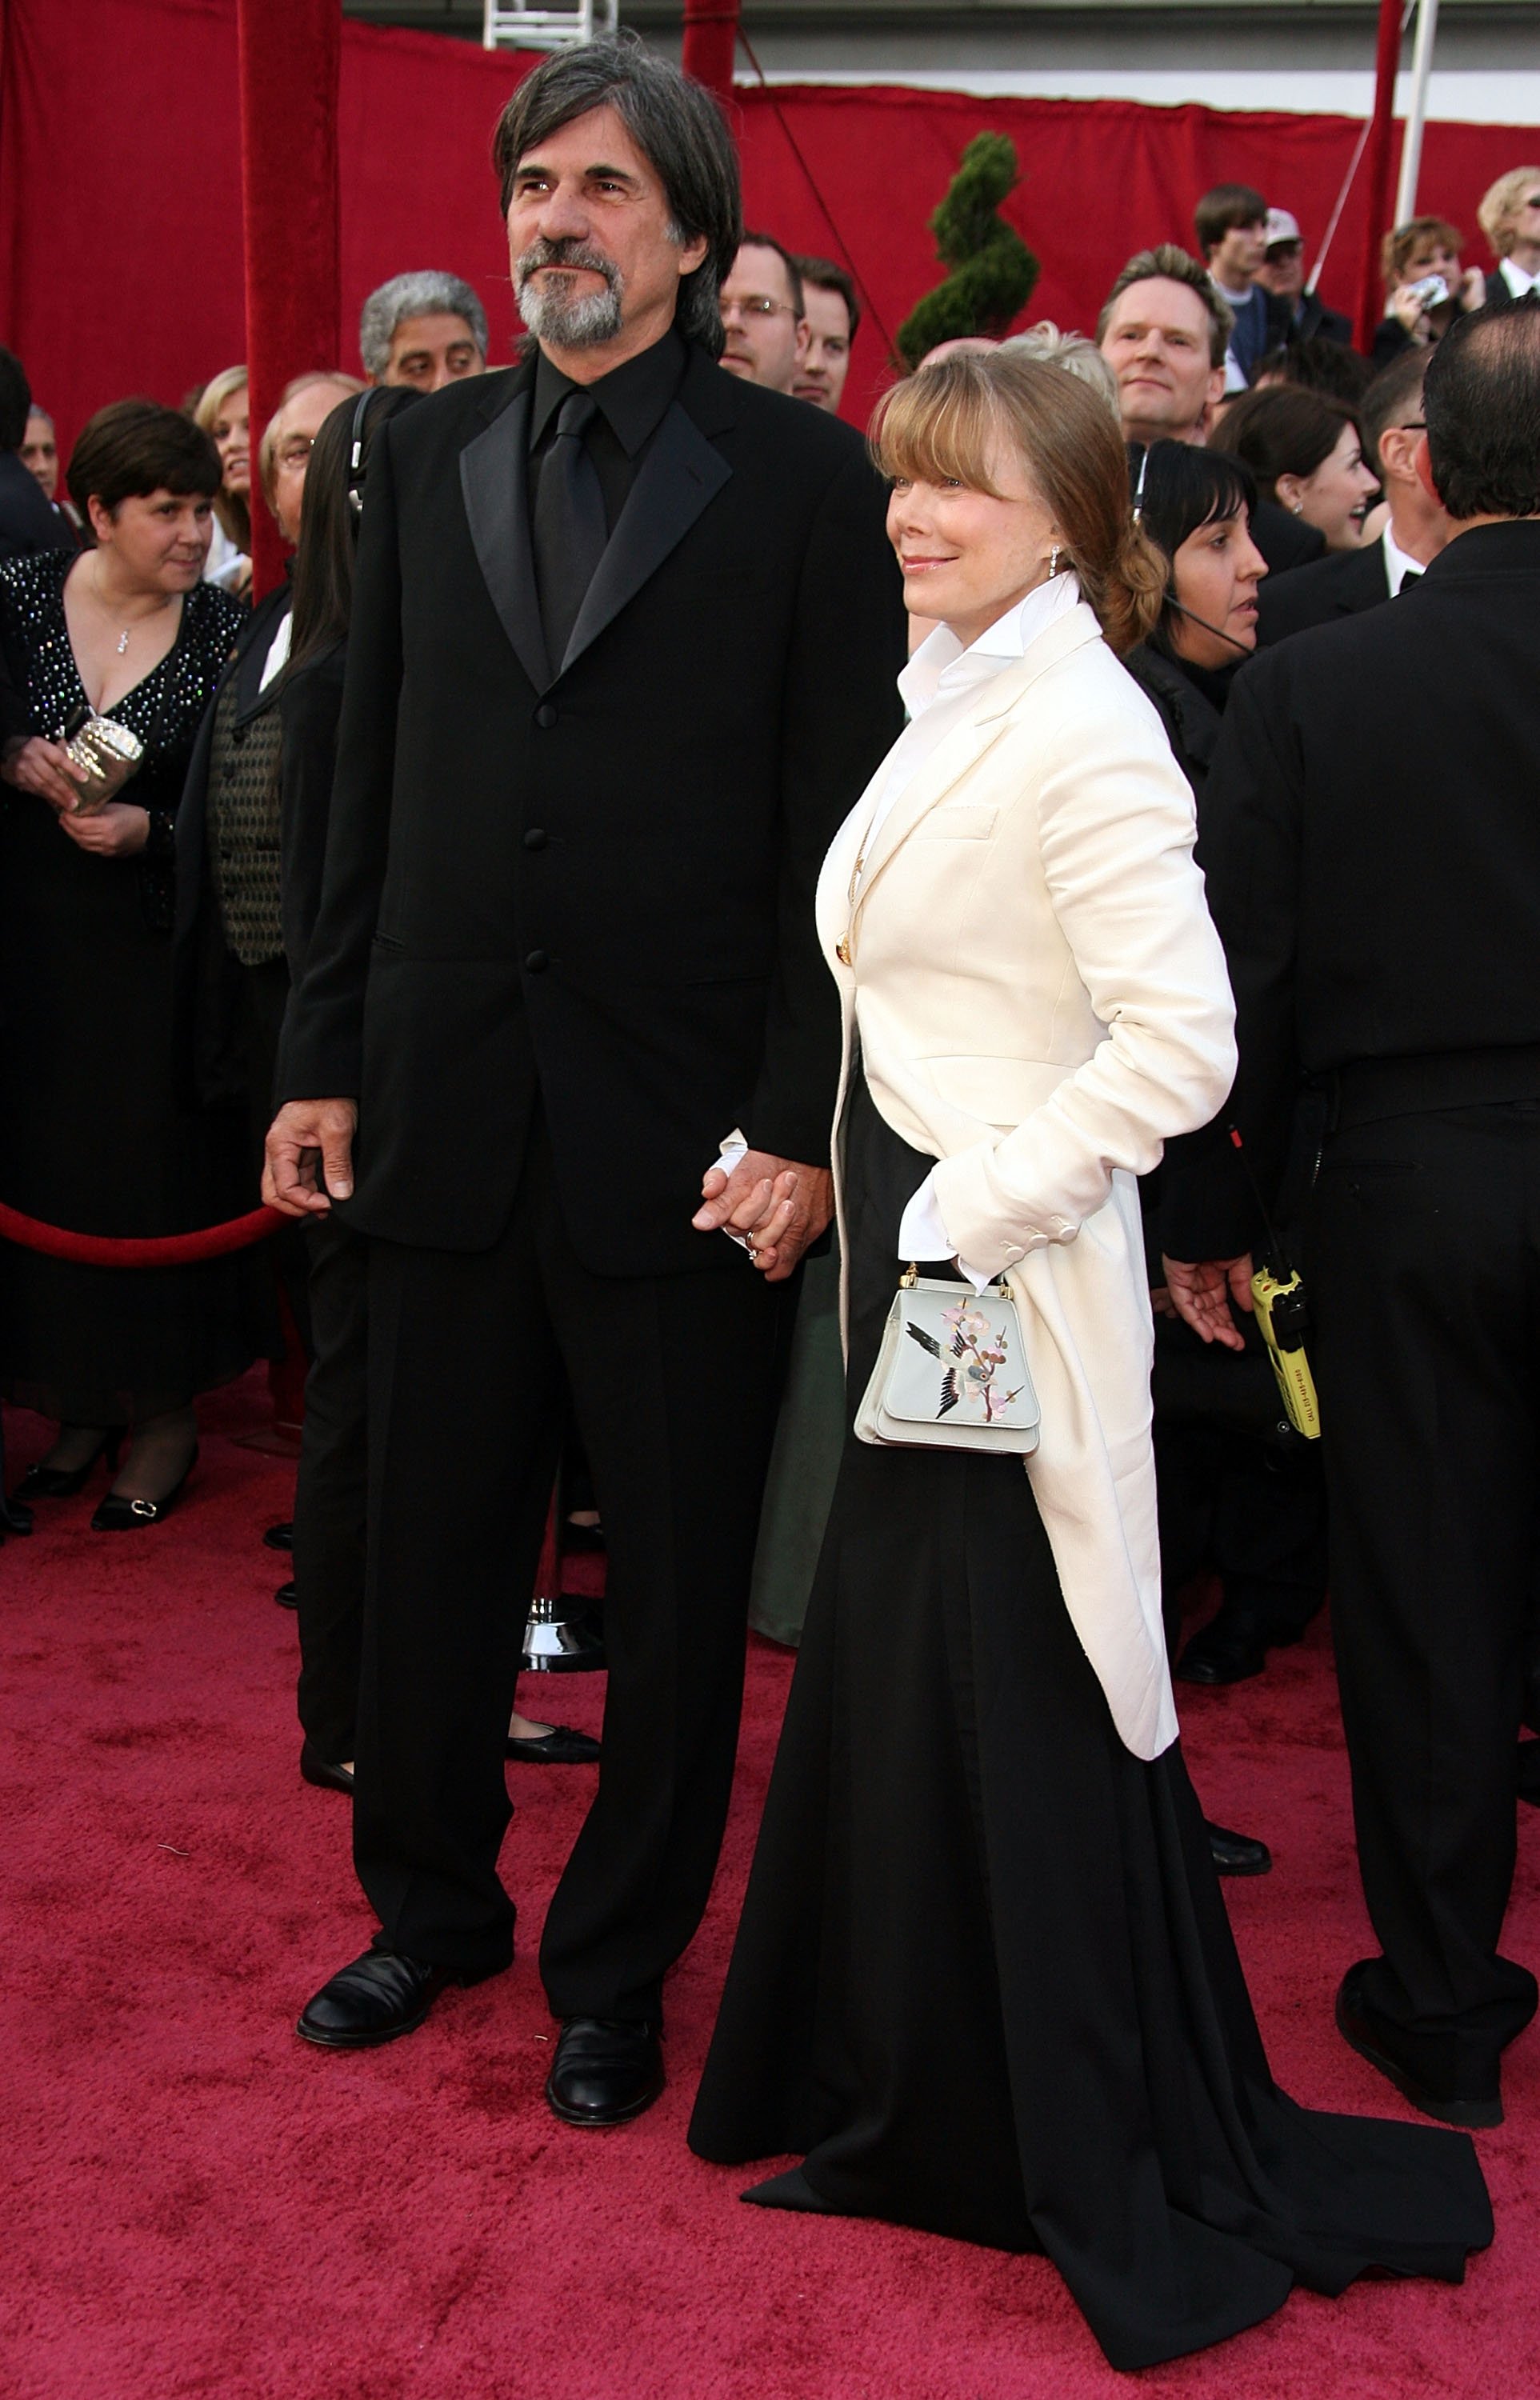 Jack Fisk and actress Sissy Spacek arrive at the 80th Annual Academy Awards held at the Kodak Theatre on February 24, 2008, in Hollywood, California. | Source: Getty Images